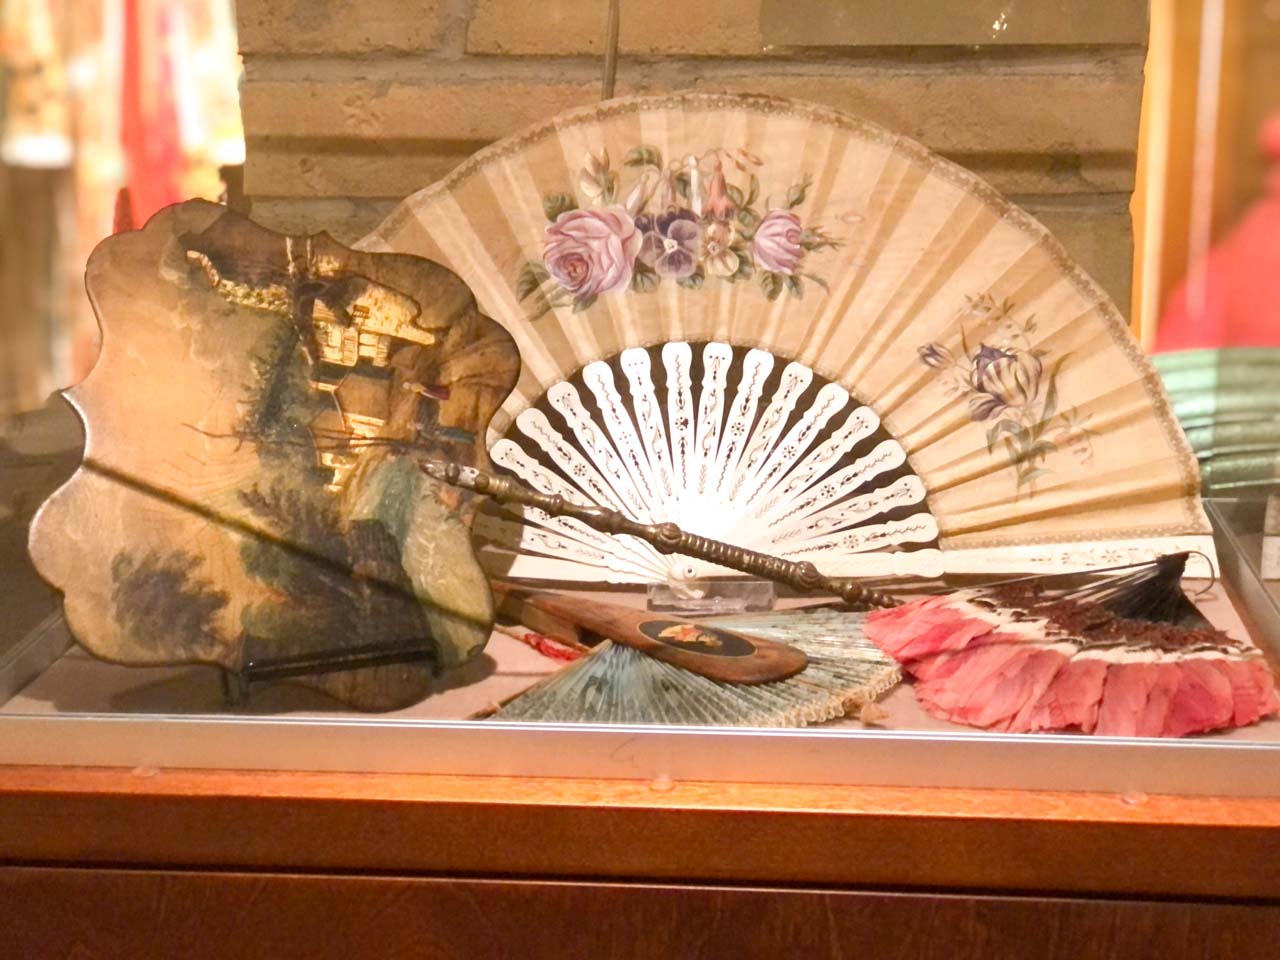 Fans on display at the Fashion Museum in Riga